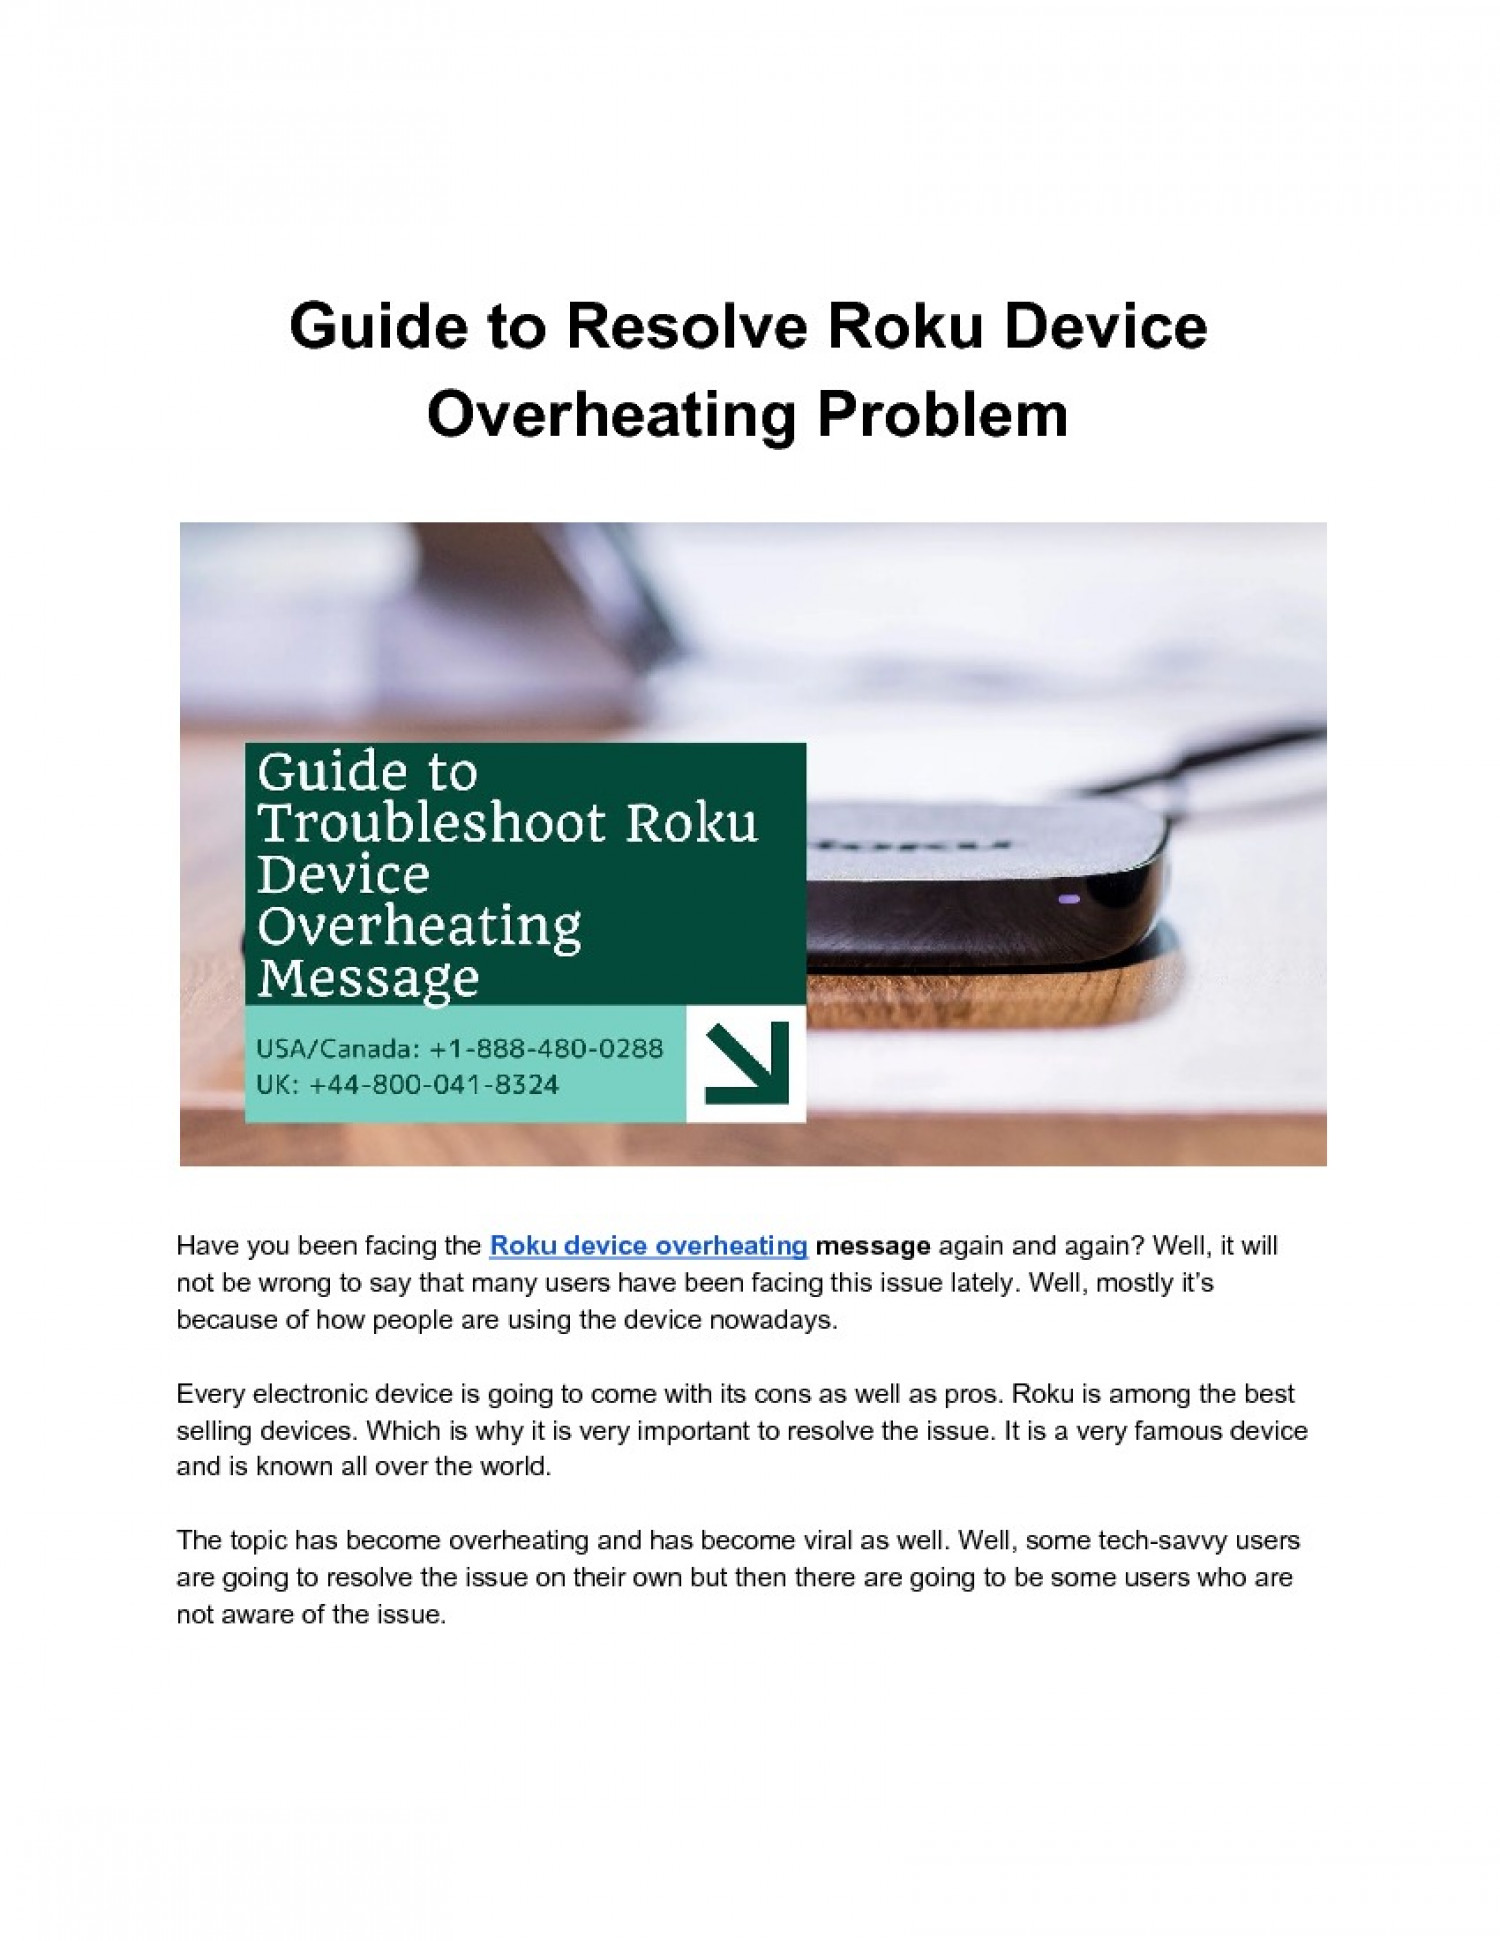 Solution for Roku Device Overheating Message Infographic